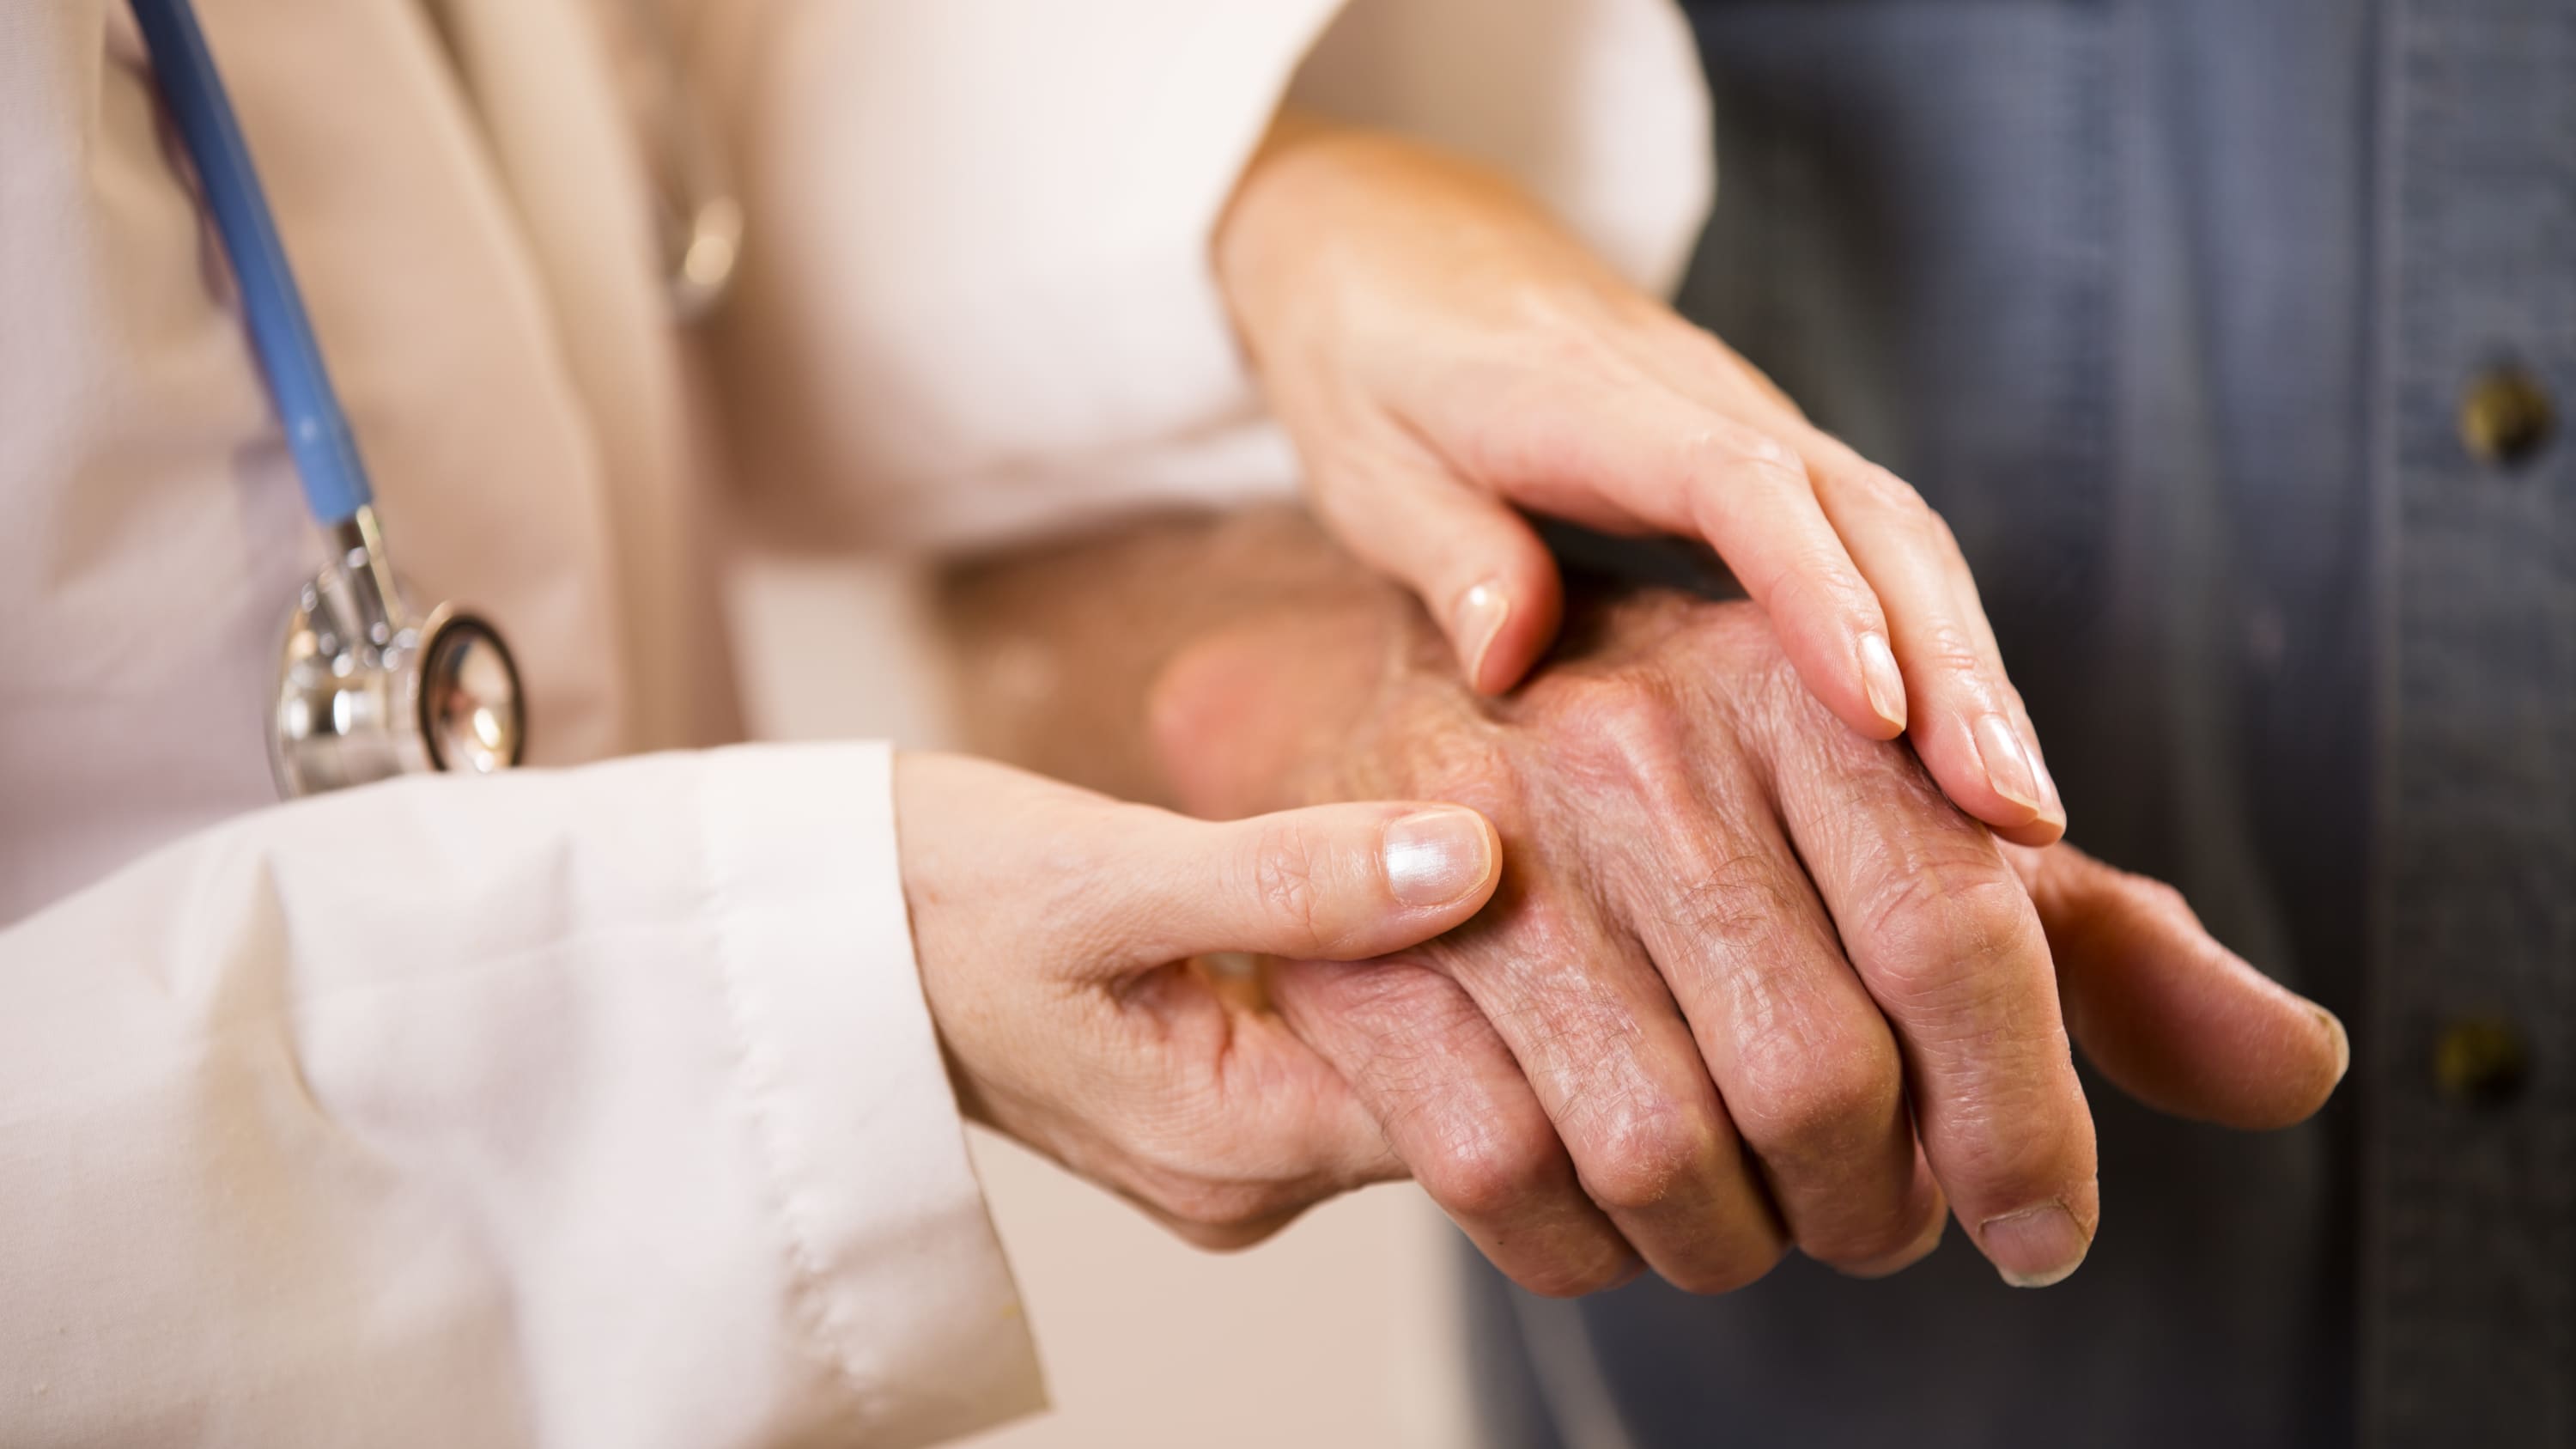 A woman touches a man's hands, someone who possibly has rheumatoid arthritis